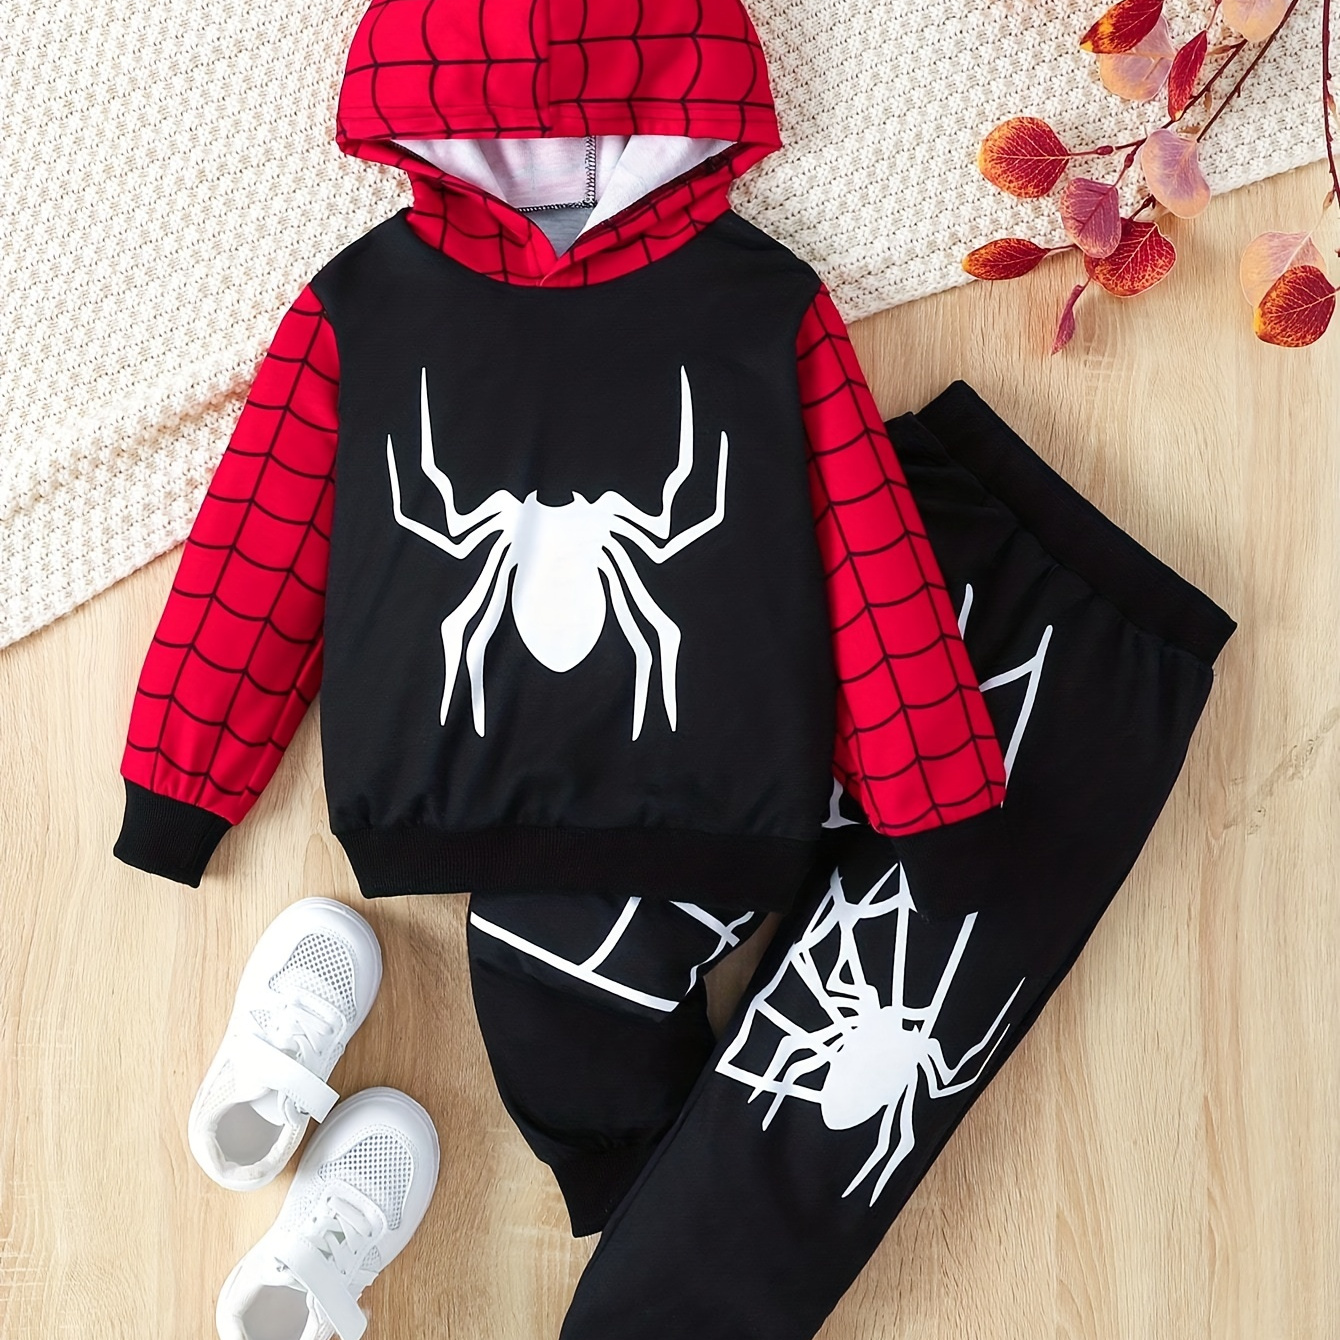 

2pcs Boy's Cartoon Spider Print Outfit, Spider Web Pattern Hoodie & Sweatpants Set, Trendy Hooded Long Sleeve Top, Kid's Clothes For Spring Fall Winter, As Gift